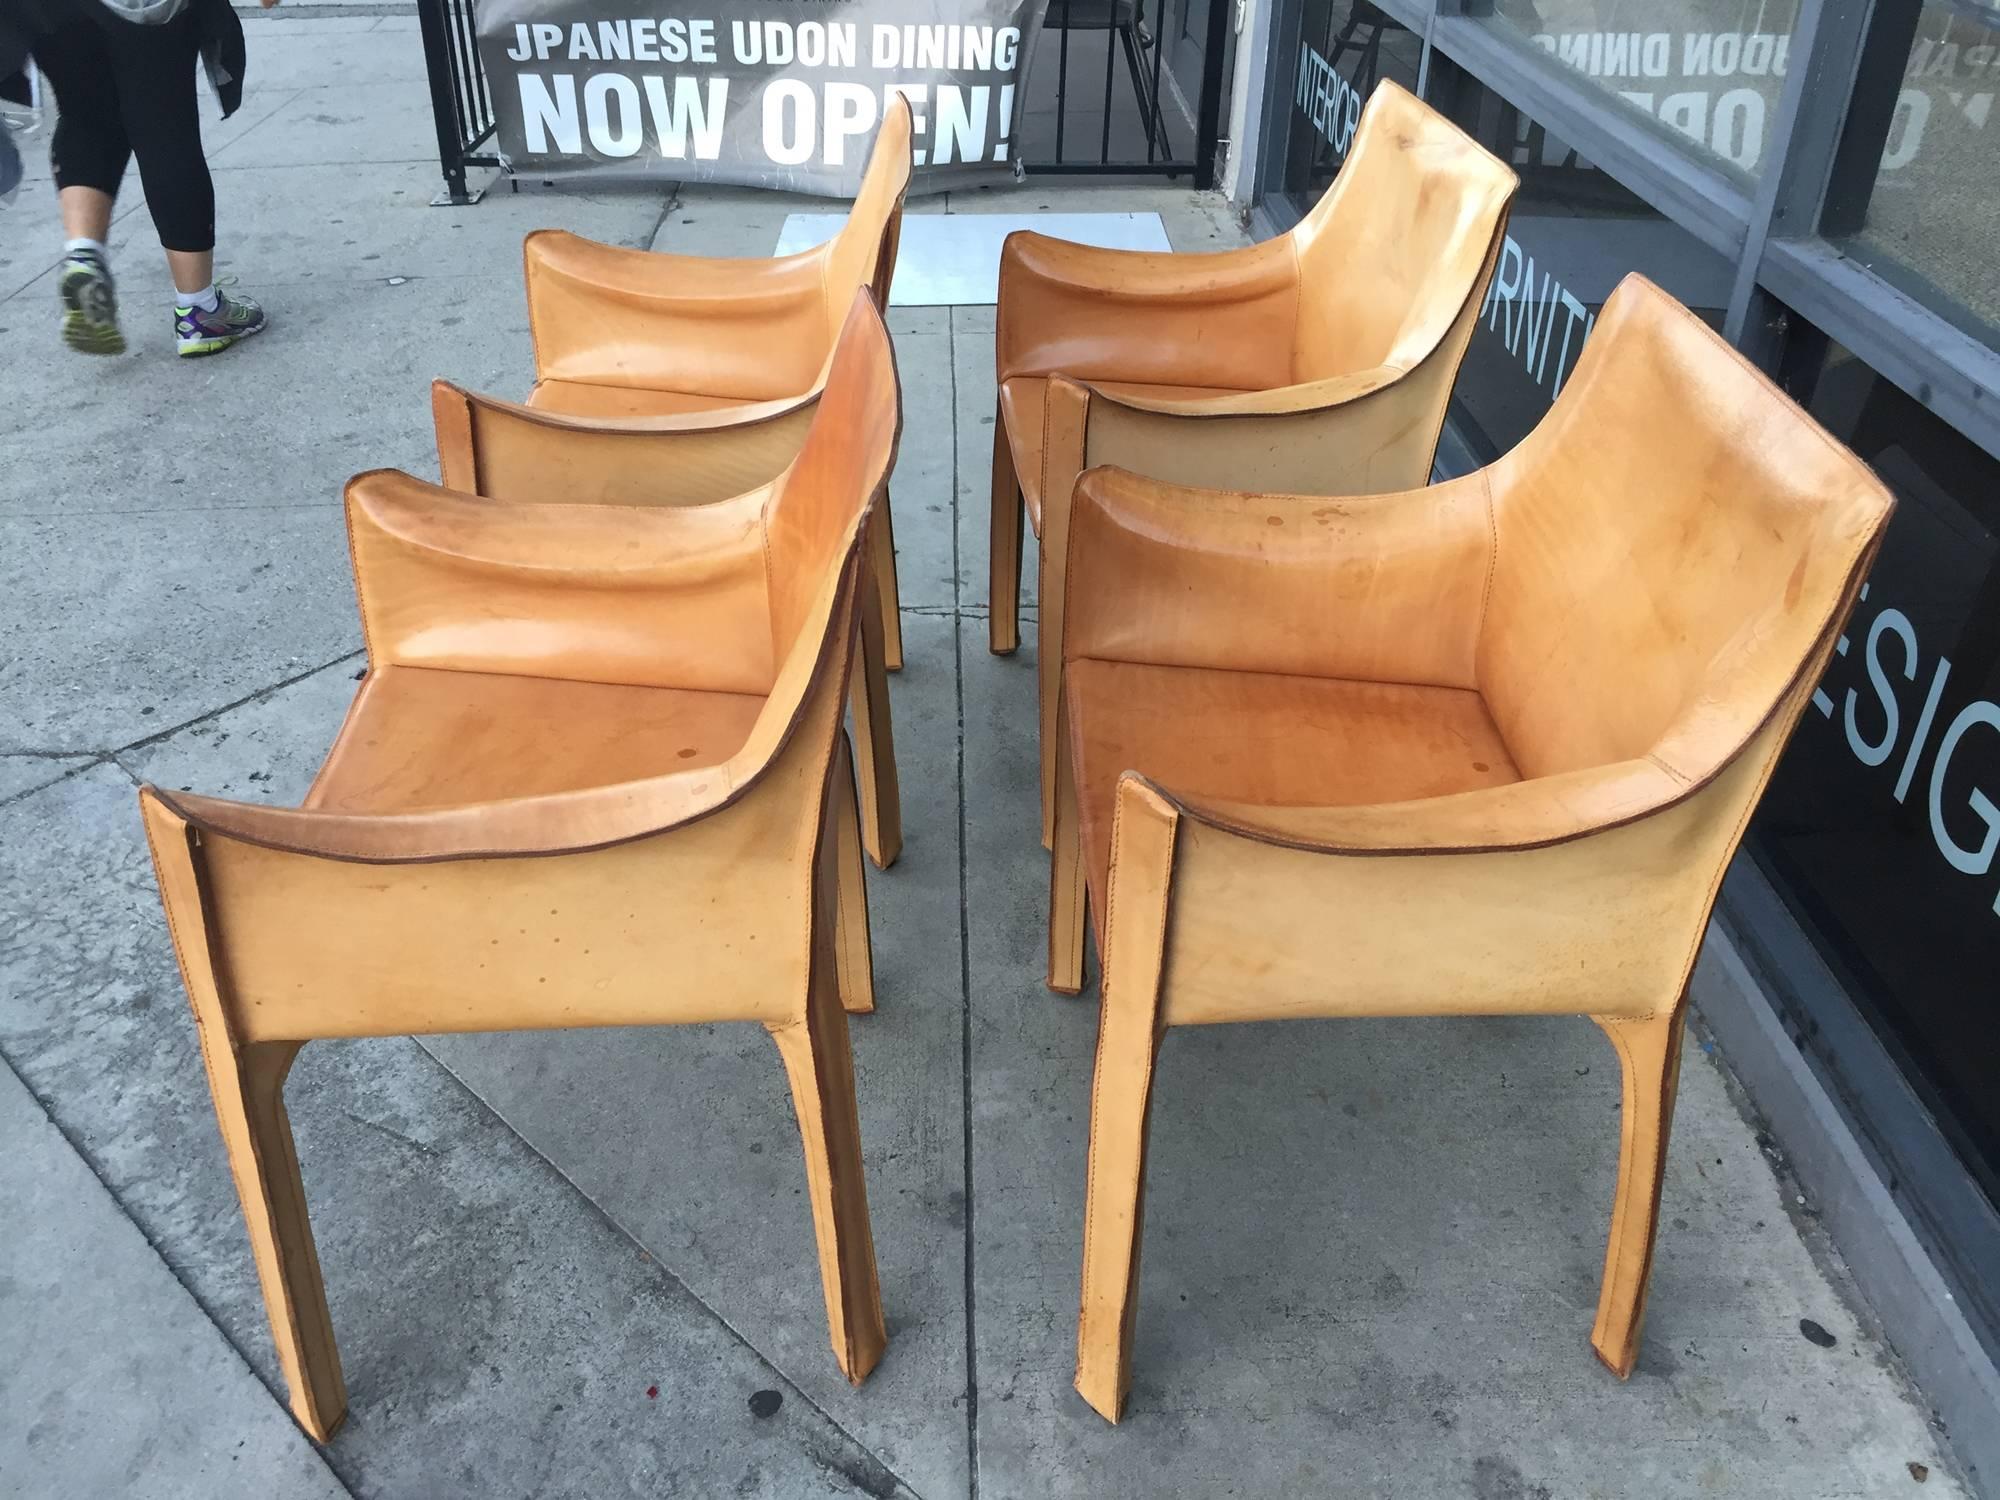 Parchment table not included but available for sale.
Cab chairs designed by Mario Bellini for Cassina Italy in the desirable and rare natural saddle leather. Great original vintage condition. Signed with molded manufacturer's mark and stamped in